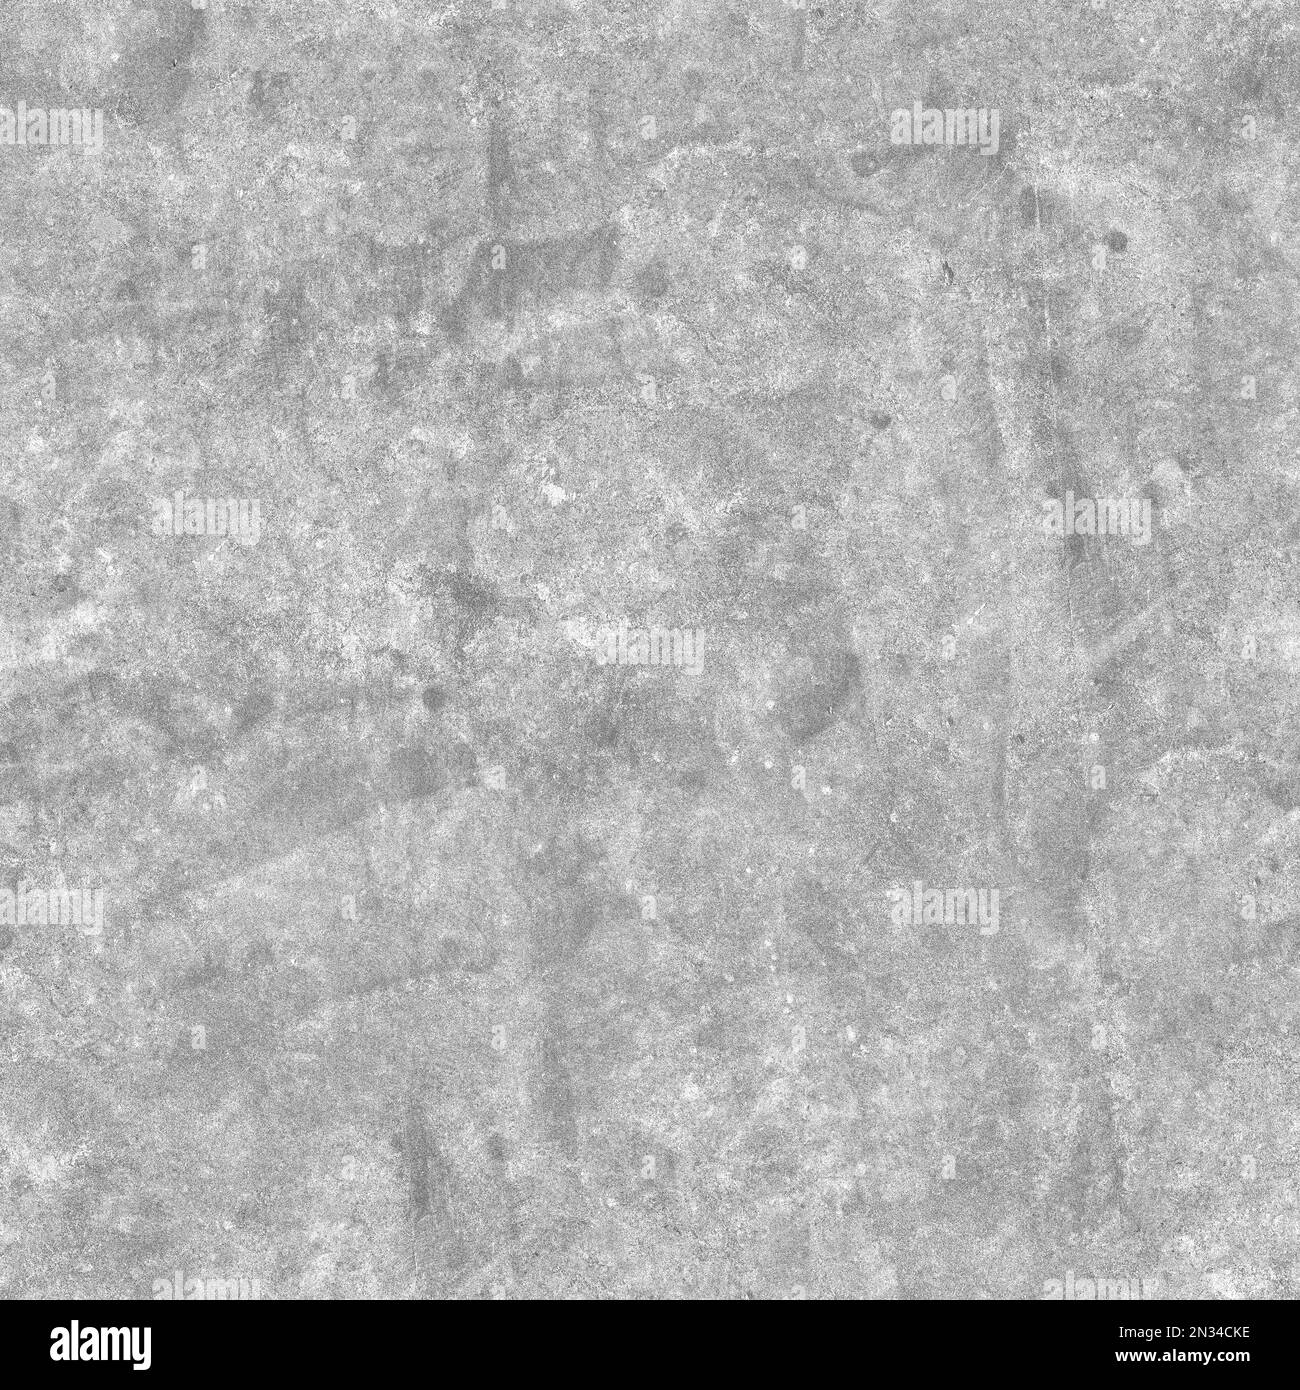 Glossiness map Texture Grunge, Gloss Grunge Texture mapping Stock Photo ...